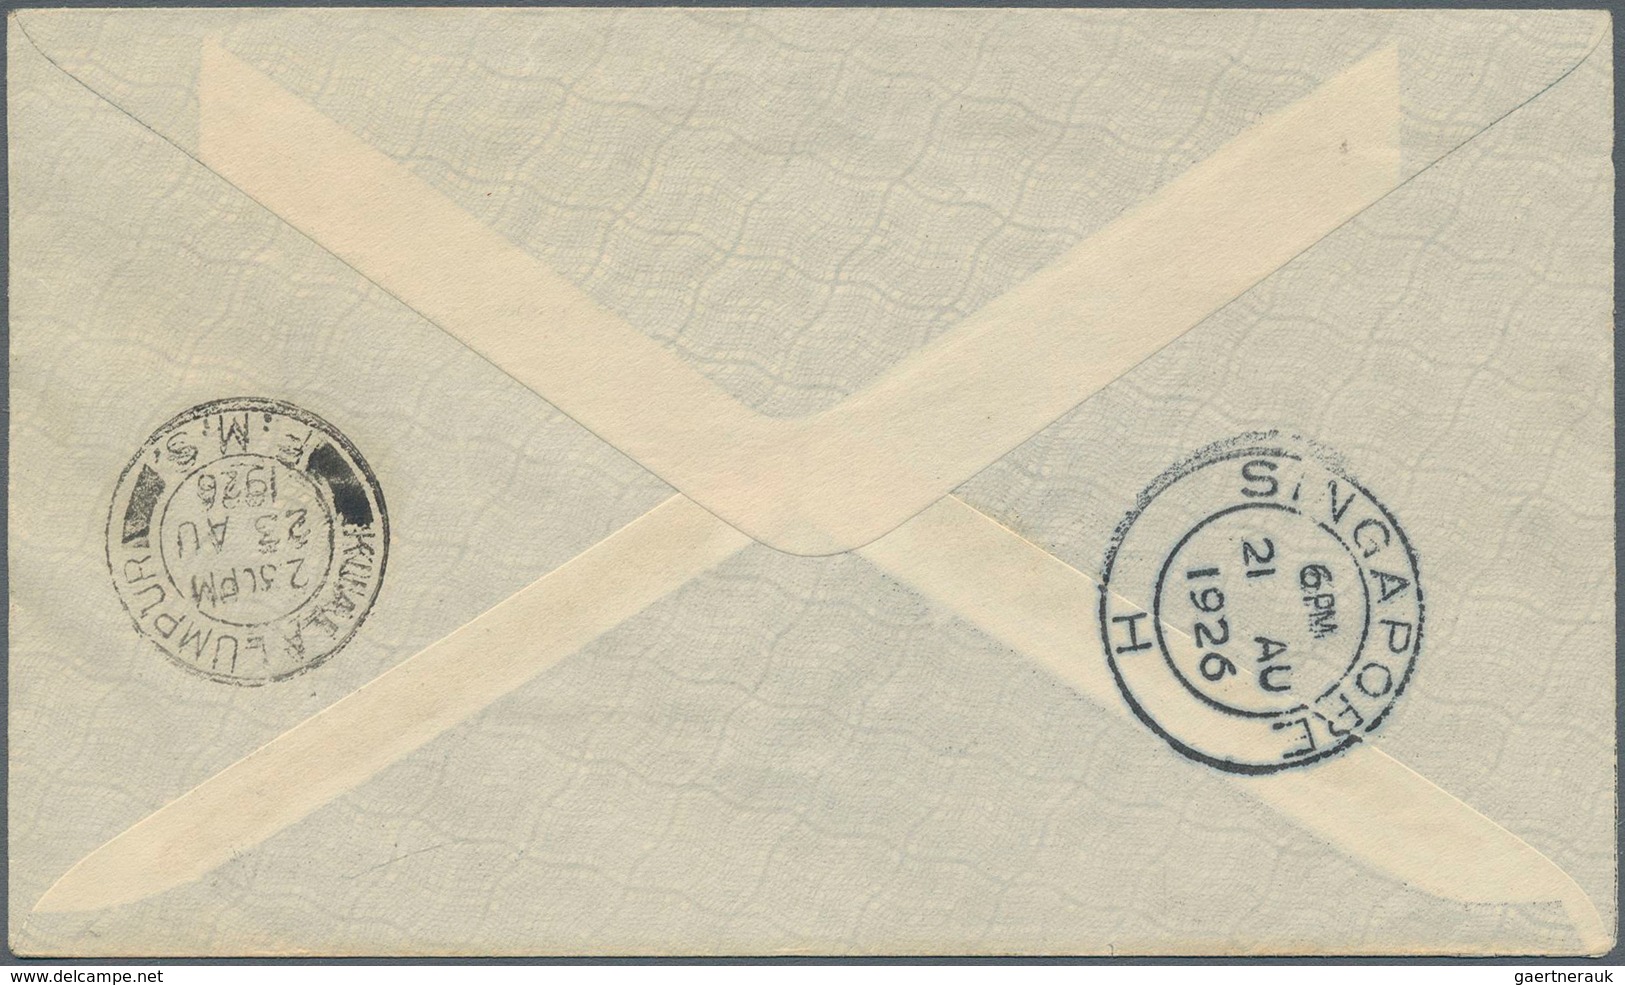 Malaiische Staaten - Straits Settlements: 1926 Early Singapore-Kuala Lumpur Airmail Cover Franked KG - Straits Settlements